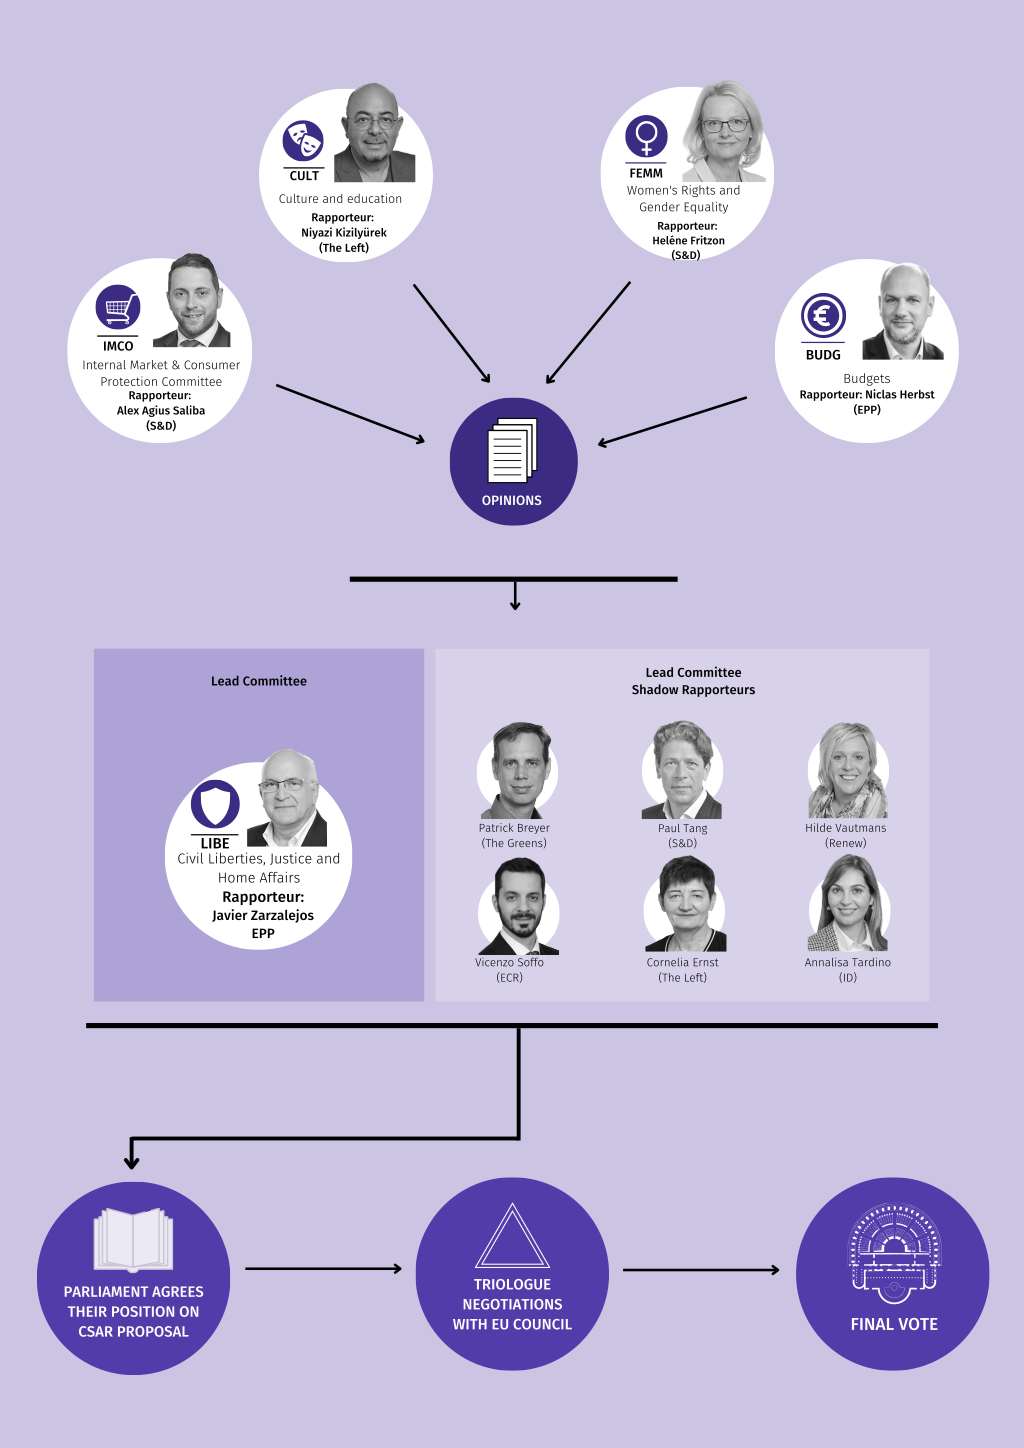 An infographic showing the legislative procedure in the European Parliament. The lead committee is LIBE (Civil Liberties, Justice and Home Affairs). The four committees that issue an opinion are IMCO, CULT, FEMM, BUDG. The four rapporteurs for the 4 opinion committees are Alex Agius Saliva (S&D) for IMCO, Niyazi Kizilyurek (The Left) for CULT, non determined yet for FEMM, and Niclas Herbst (EPP) for BUDG. They all submit their opinions to the Lead Commitee LIBE . The lead Rapporteur of the lead LIBE Committee is Javier Zarzalejos (EPP). TheShadow Rapporteurs are Patrick Breyer (The Greens), Paul Tang (S&D), Hilde Vautmans (Renew), Vicenzo Soffo (ECR), Cornelia Ernst (The Left) and Annalisa Tardino (ID). The lead committee issues a report and proposes it to the plenary, as the basis for the Parliament's position. The official position is debated and agreed on by the Parliament. This position will later be negotiated in Trilogue Negotiations with the EU Council and the European Commission. The agreed compromise  will be subject to a final vote.